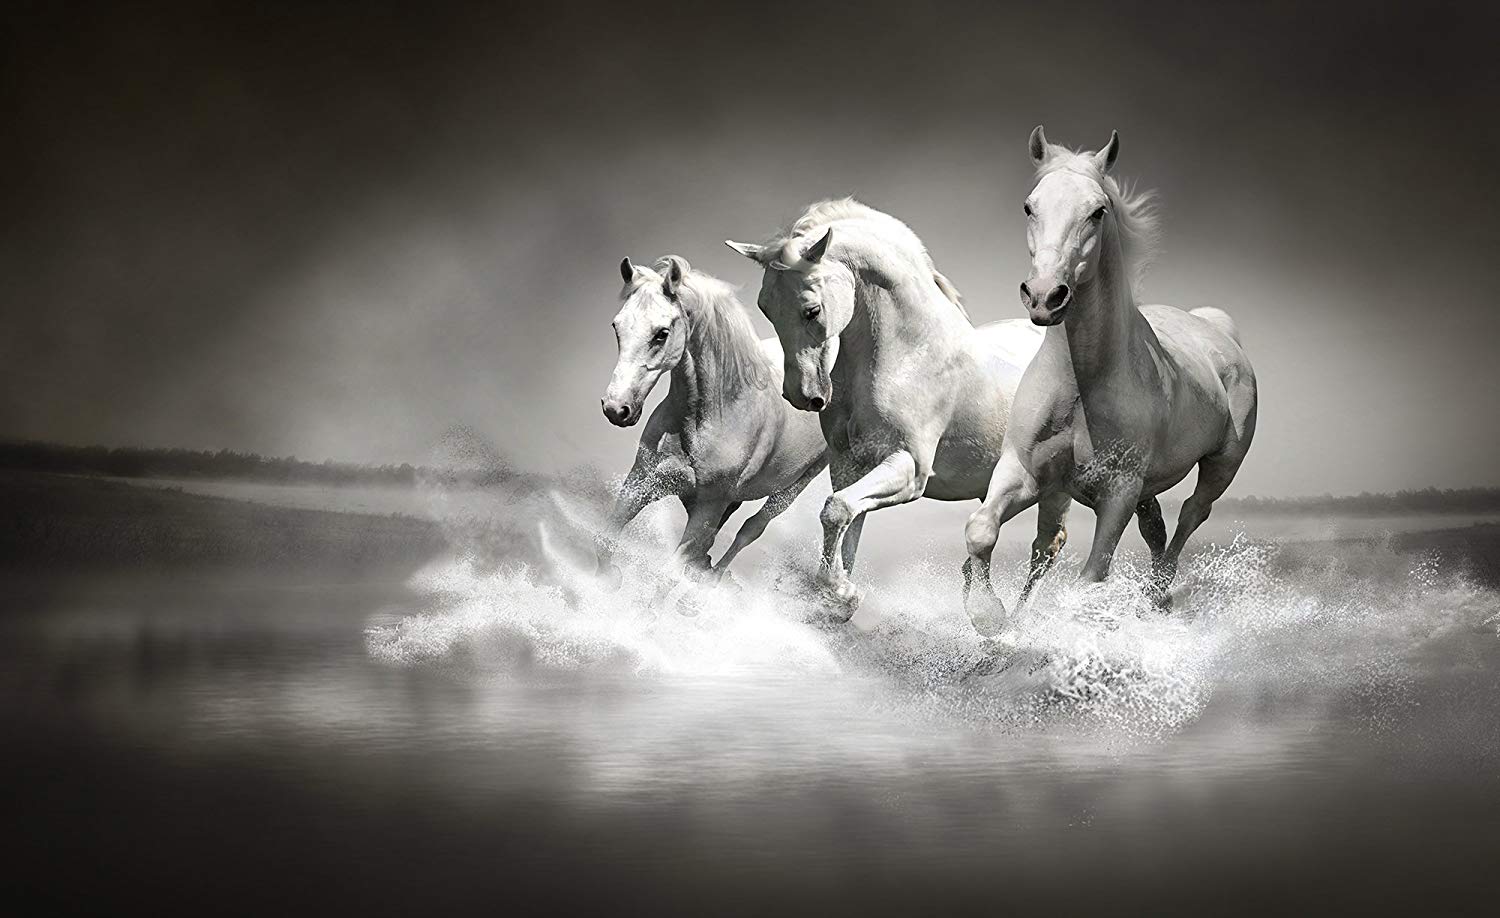 Galloping Horses Black And White Wallpaper Mural By Consal